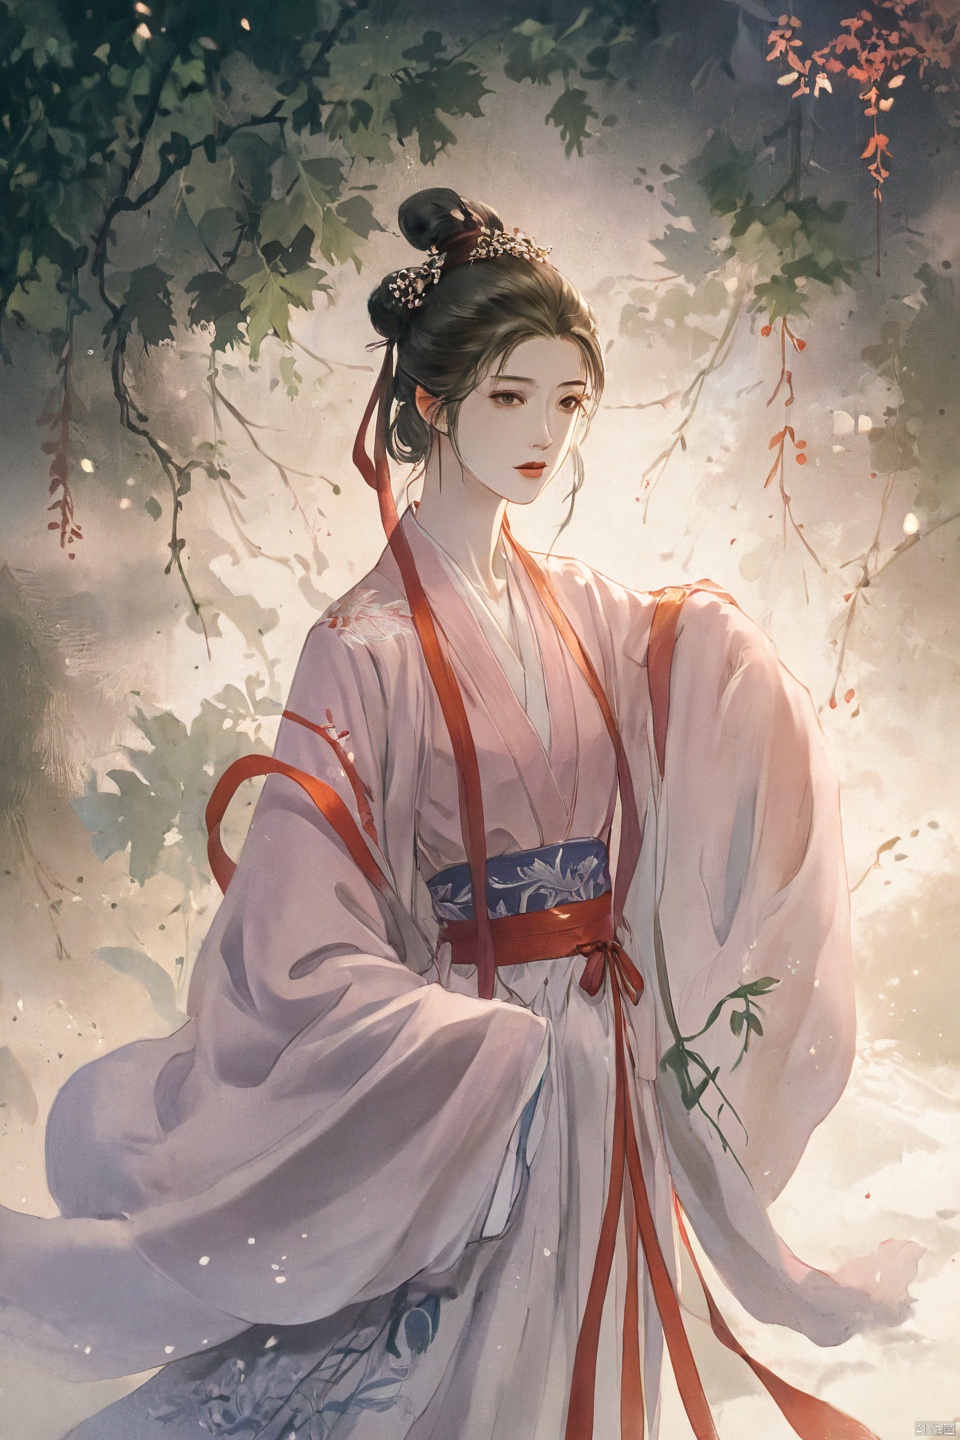  Fashion editorial style a asian girl with hanfu ruqun,Jin style, joint brand, ribbon, Withered leaves, old vines, plant illustration, splash ink,High fashion, trendy, stylish, editorial, magazine style, professional, highly detailed, cinematic lighting, Dramatic lighting, concept art,